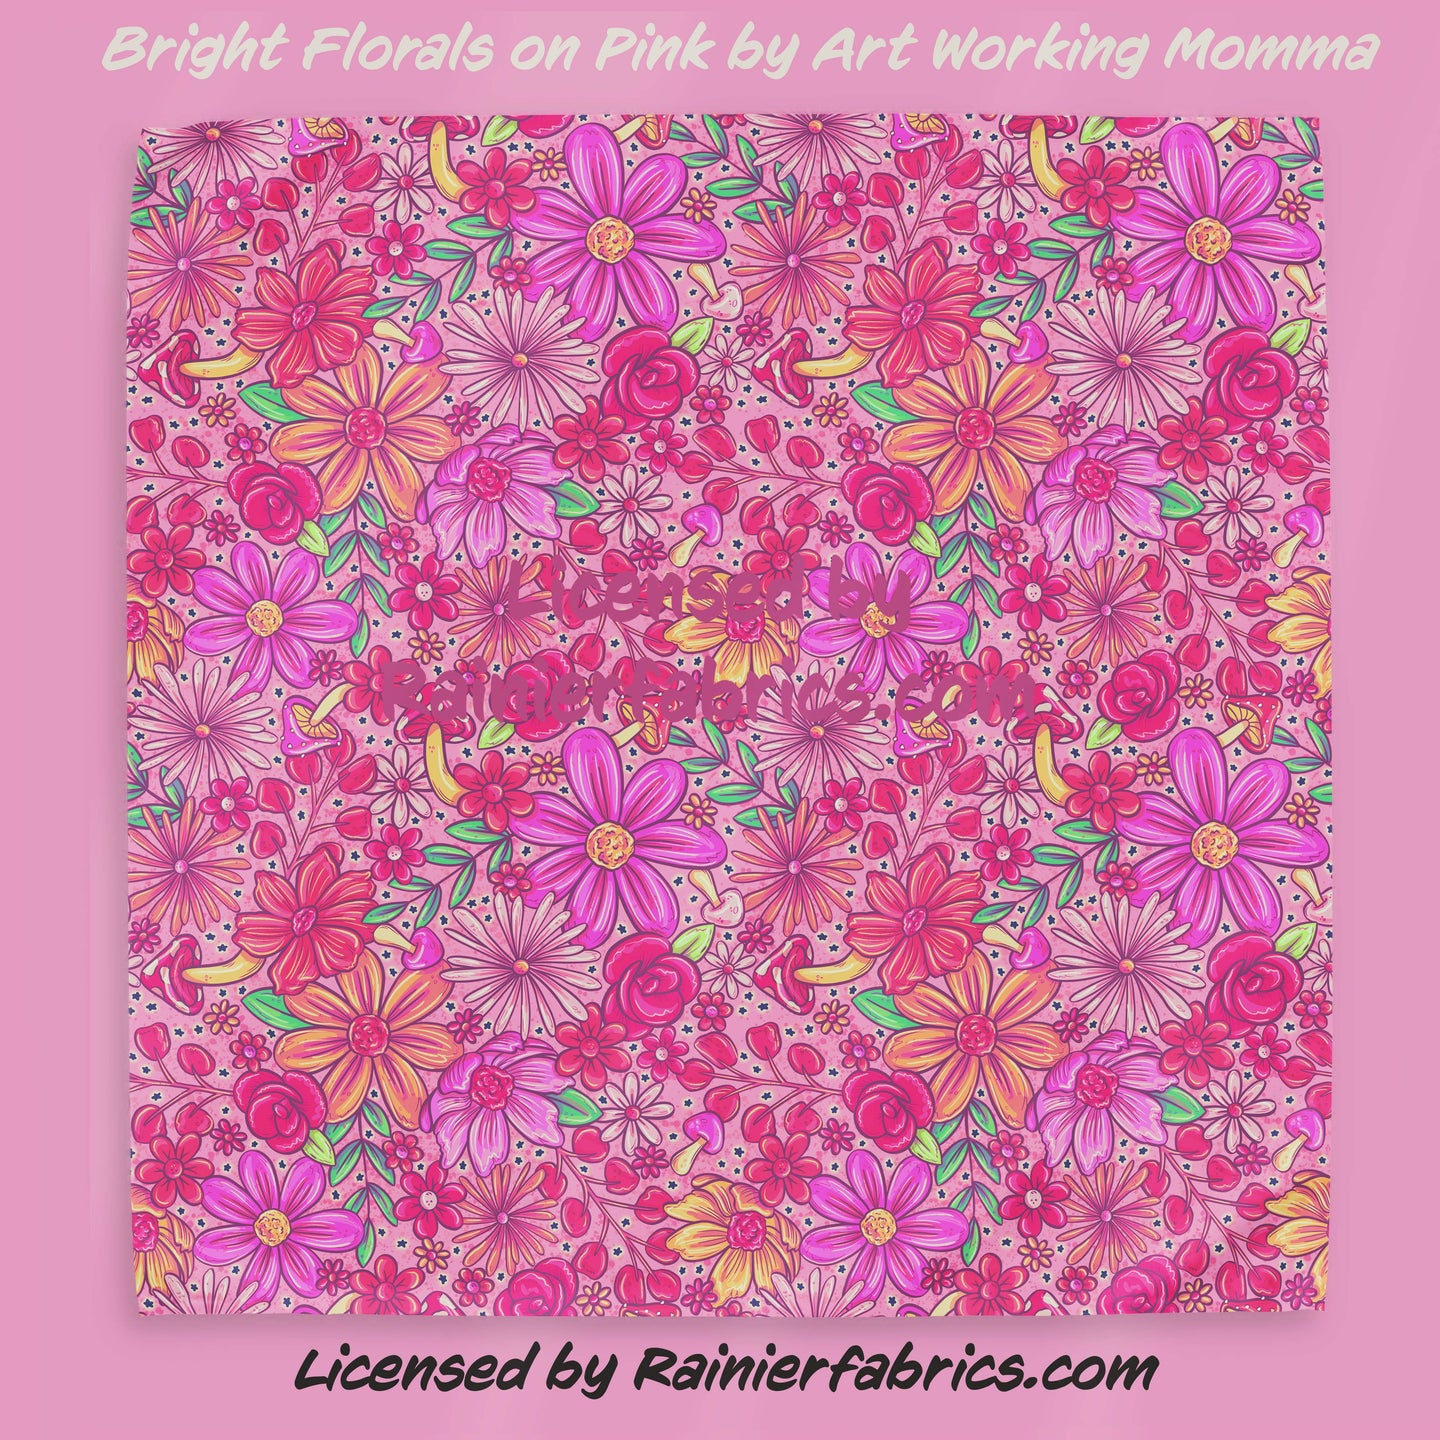 Bright Florals from Art Working Momma - Pinks! - 2-5 business days to ship - Order by 1/2 yard